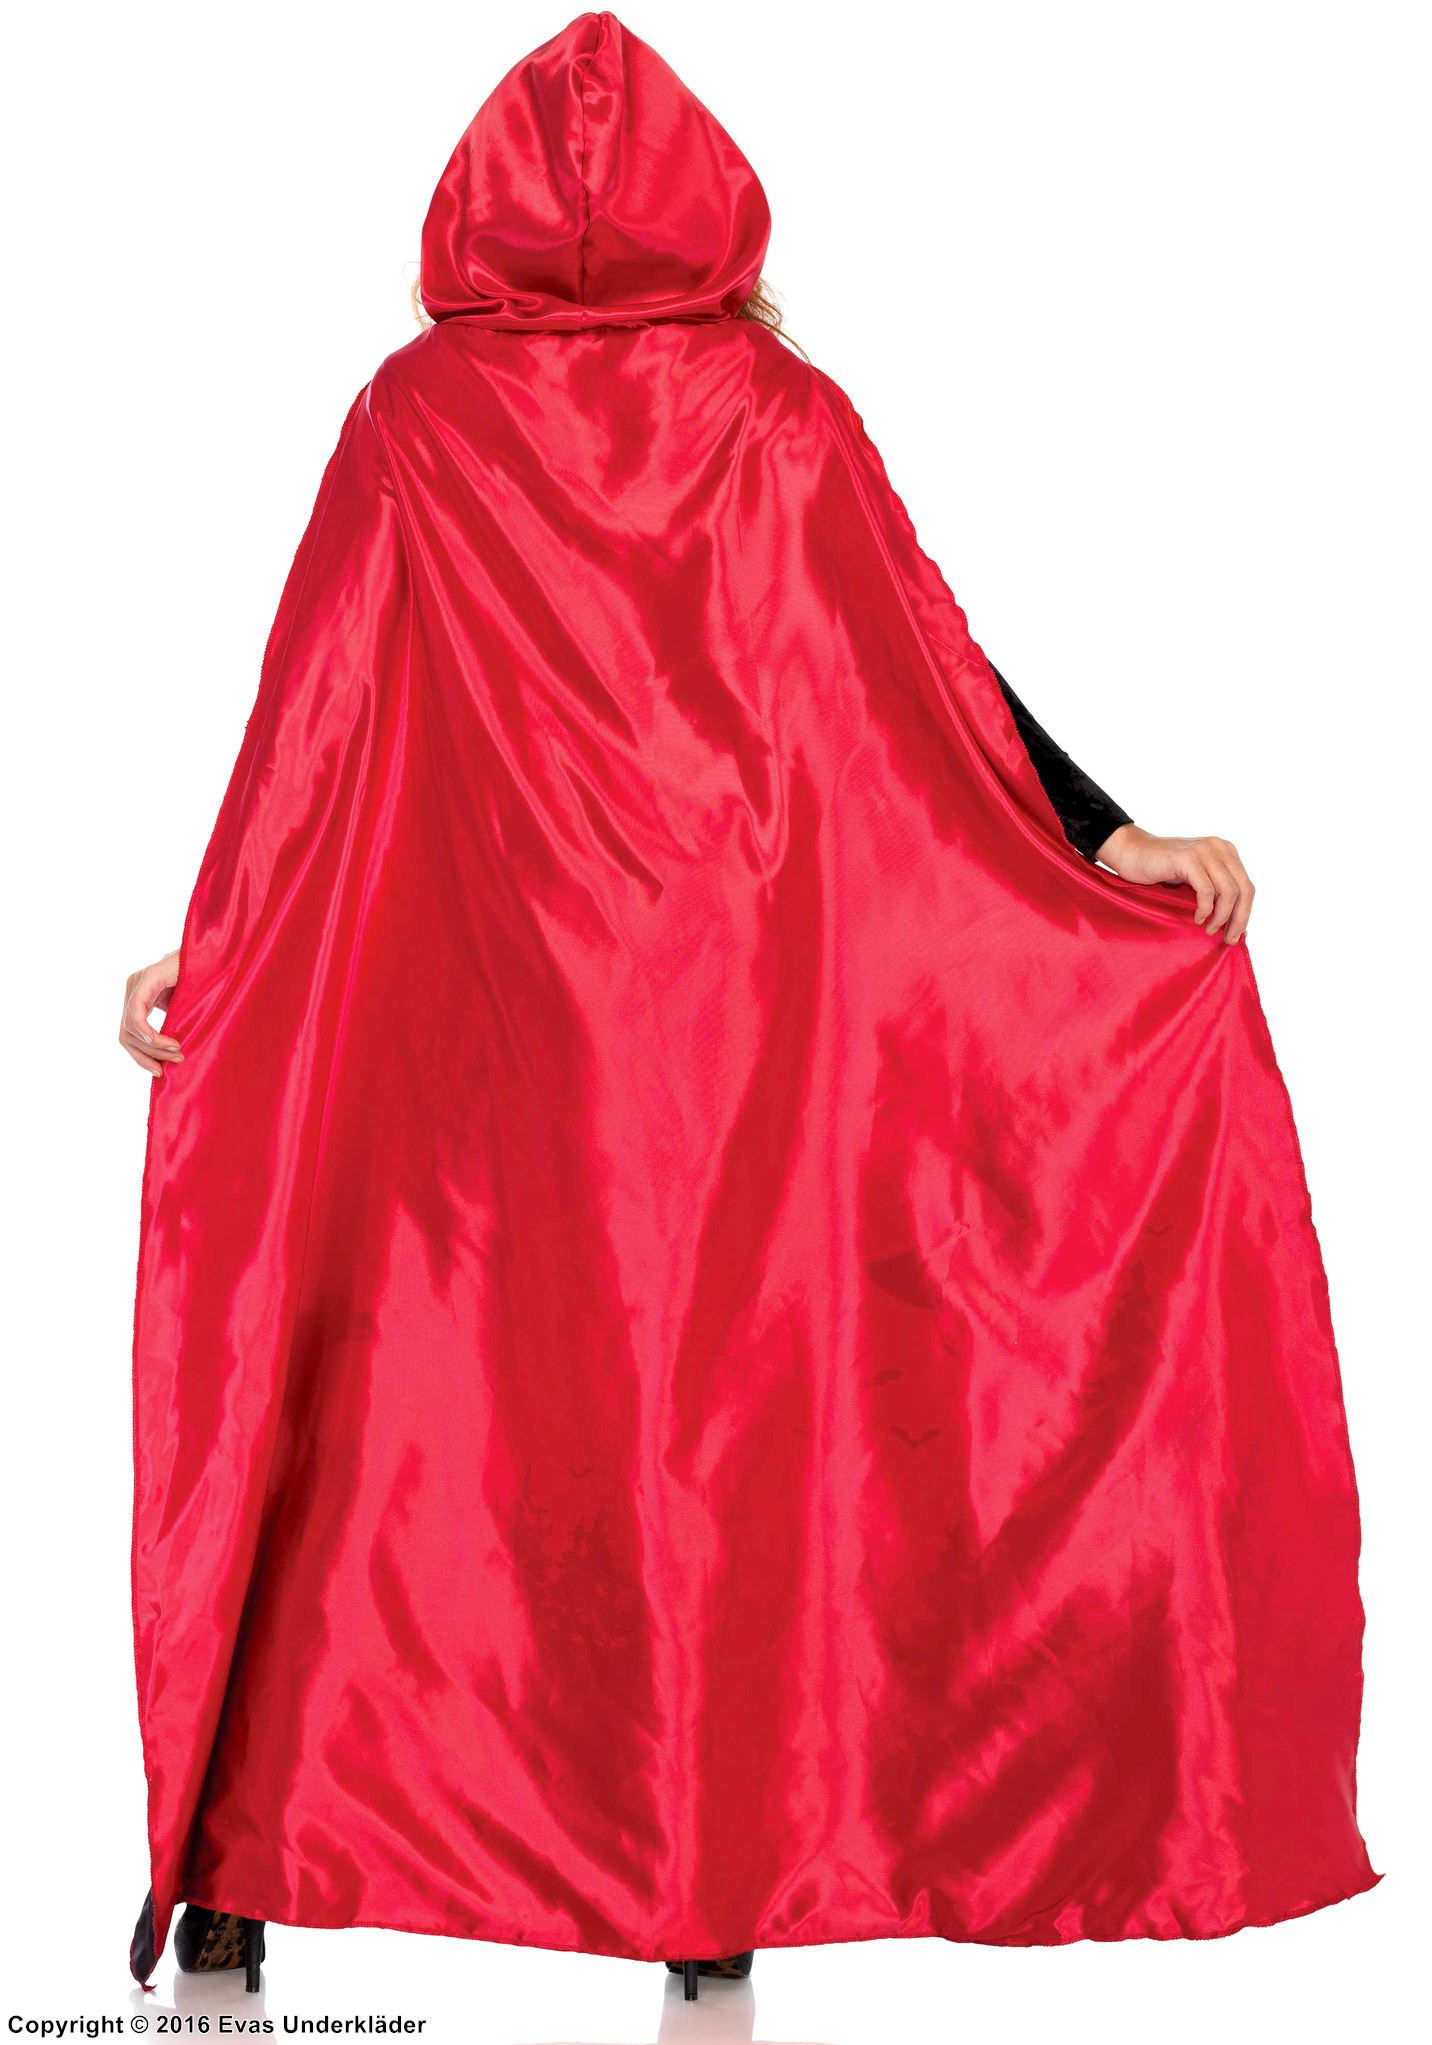 Red Riding Hood, costume cape